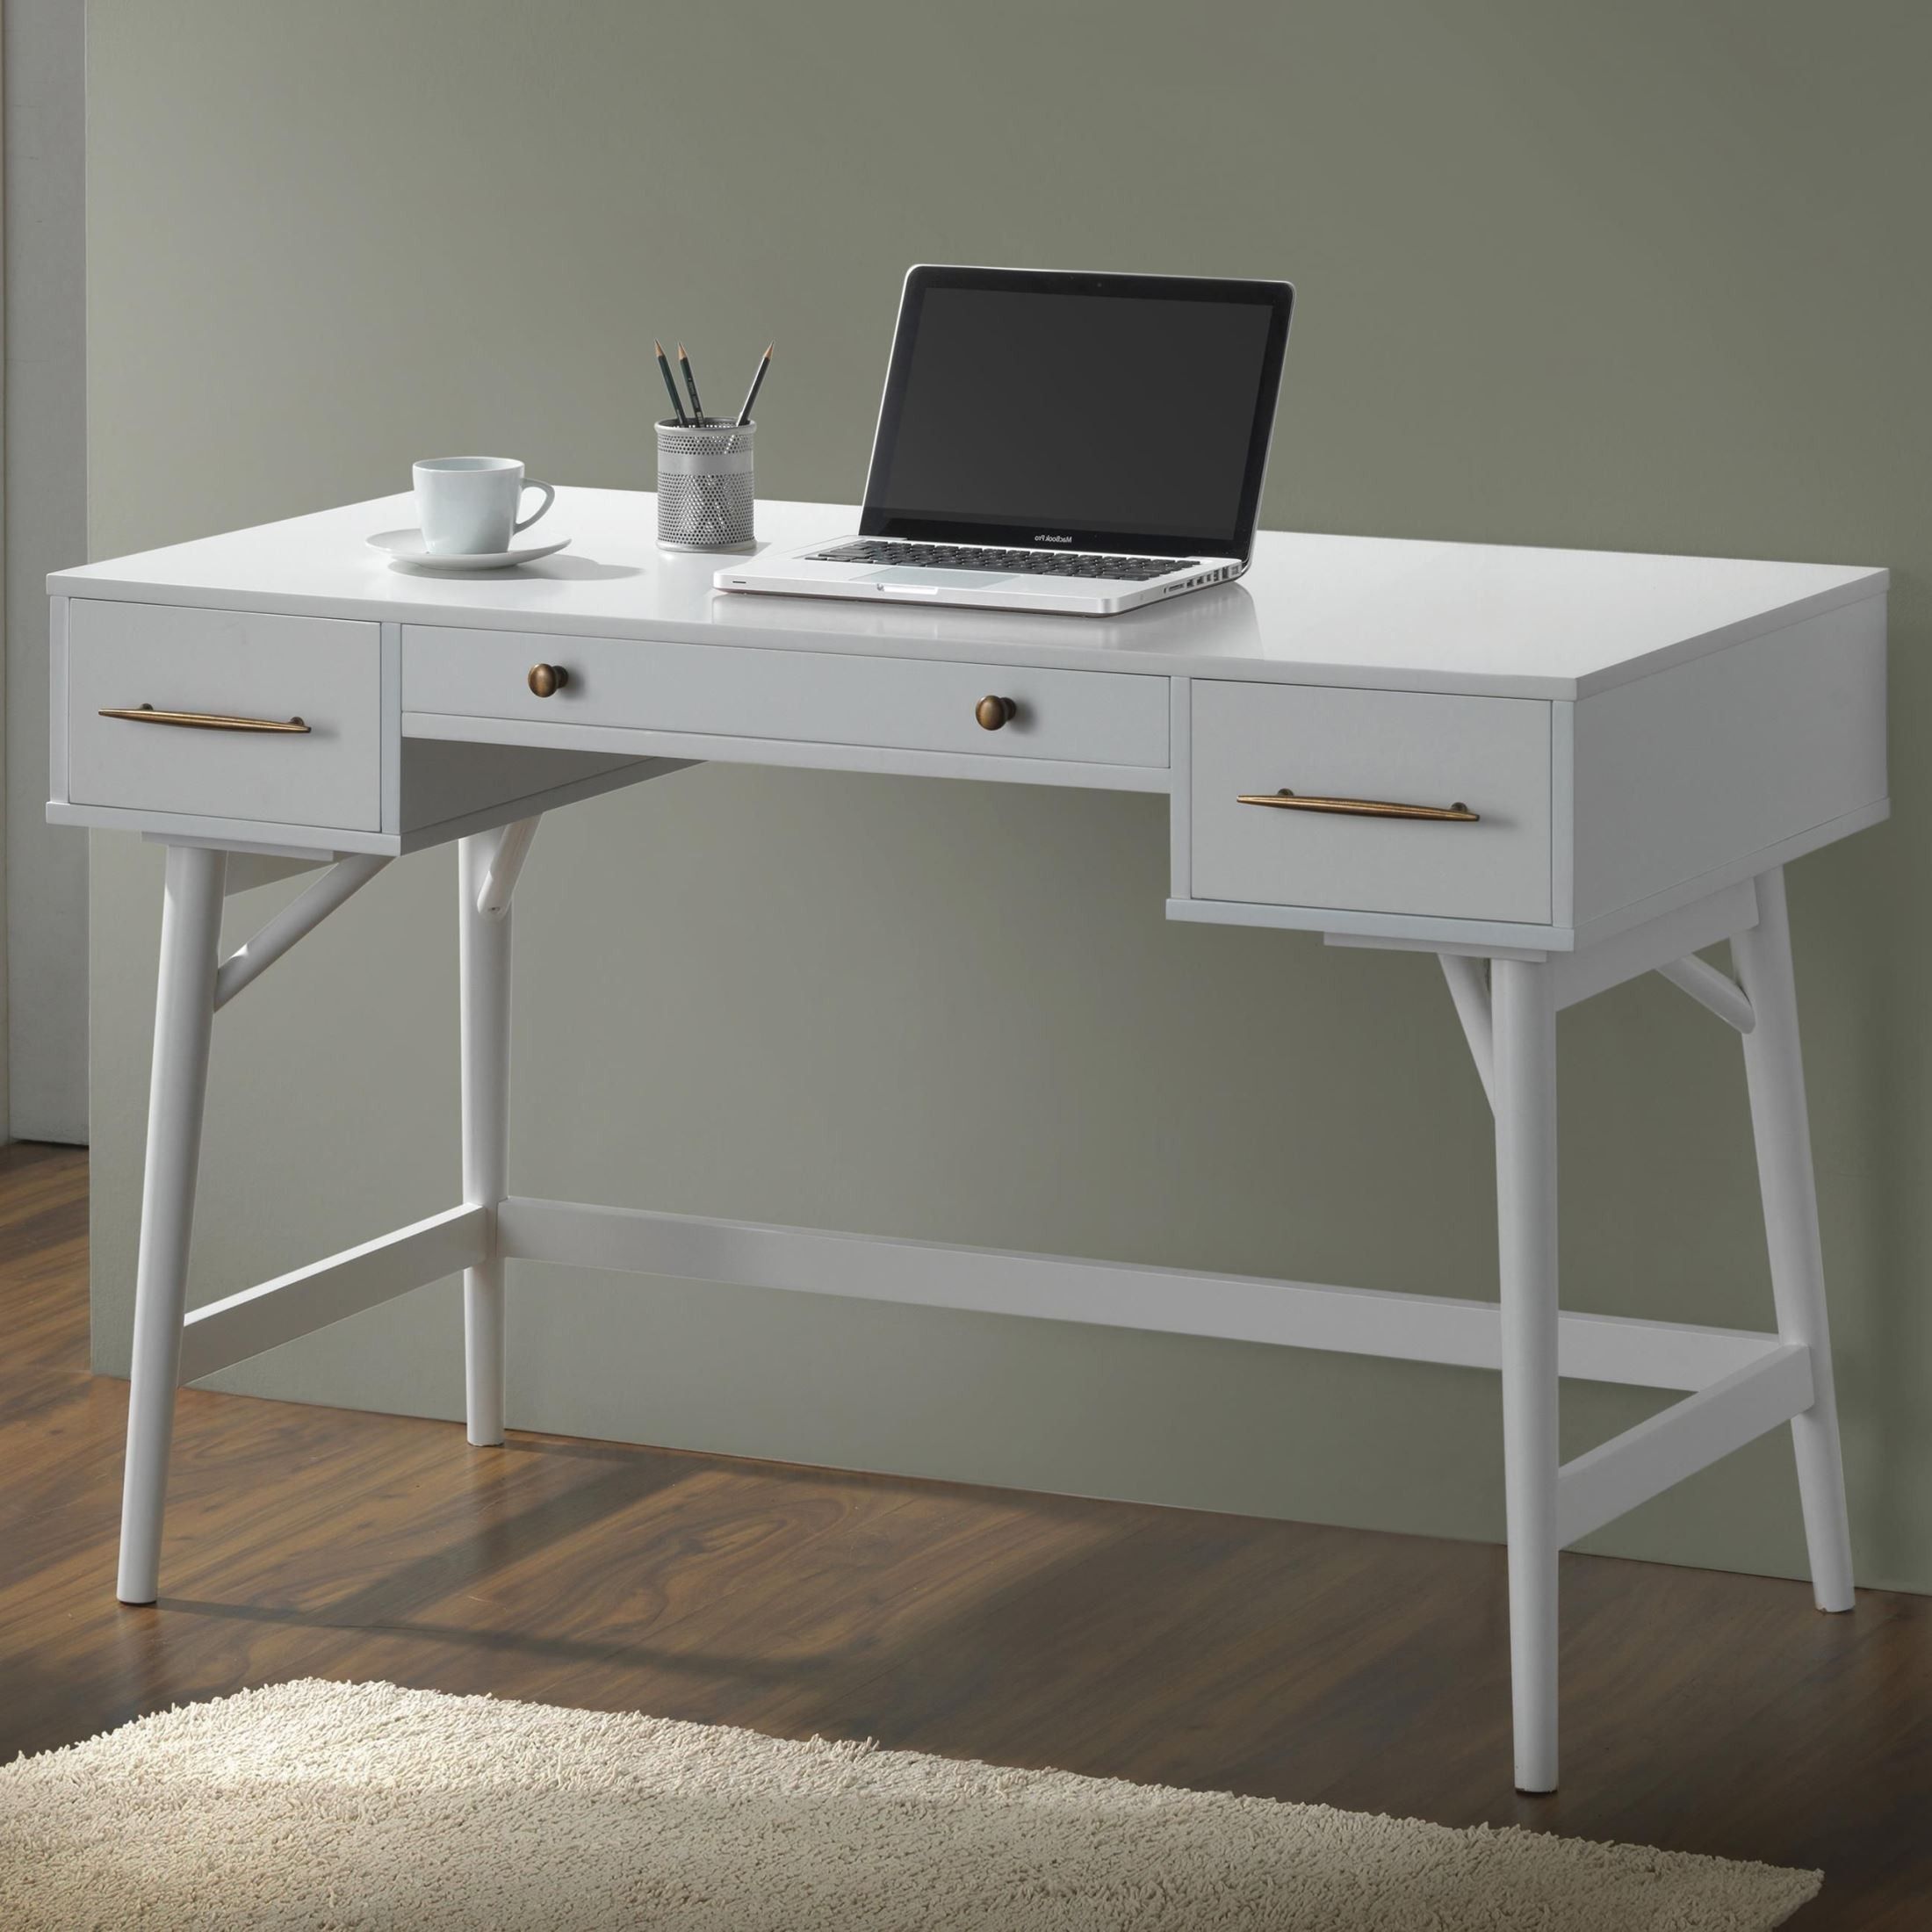 800745 White Writing Desk From Coaster (800745) | Coleman Furniture Within White Wood Modern Writing Desks (View 6 of 15)